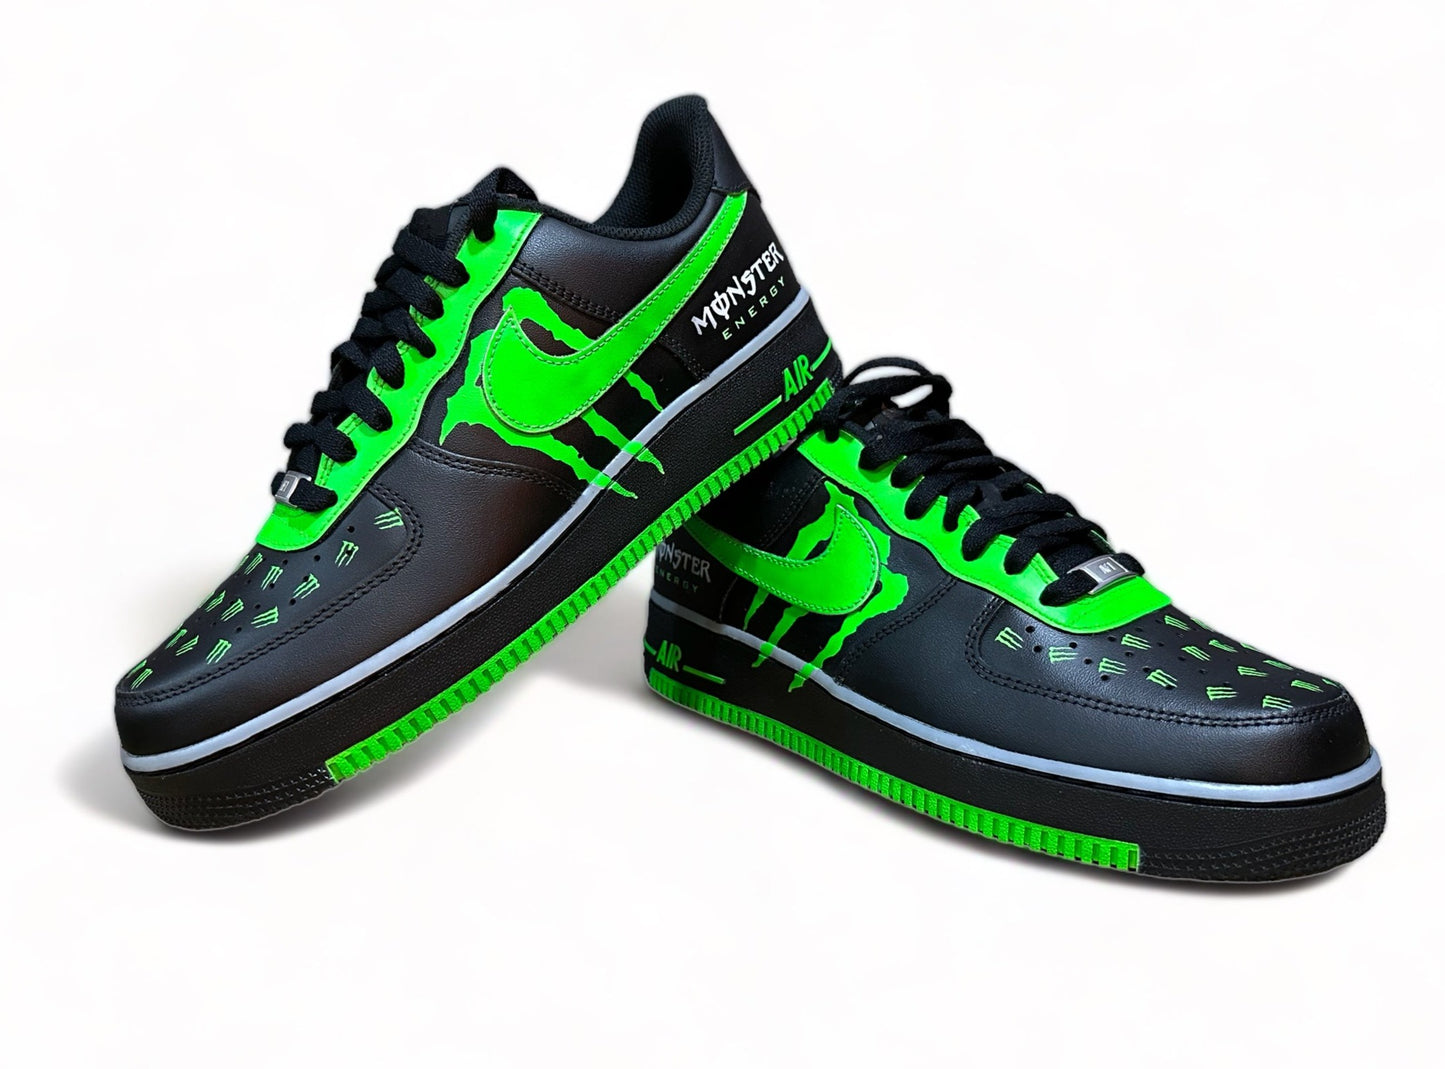 Nike Air force one "Monster Edition"